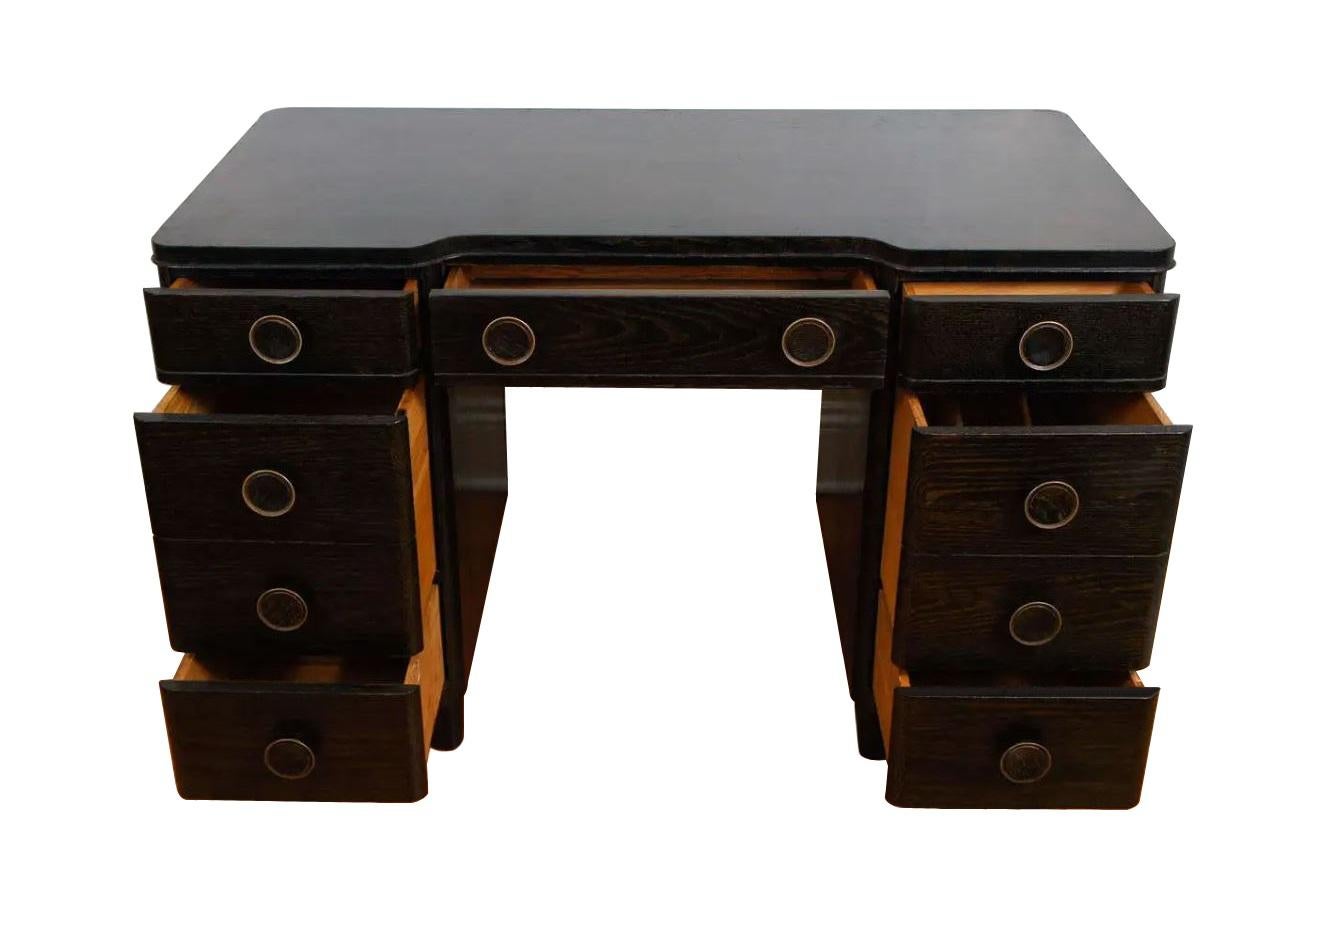 A very well crafted oak desk produced by Huntington Chair Corporation. This incredible example of Art Deco design is a collectible piece. Restored to mint condition. The desk has a cerused finish which highlights the nubian oak wood grain. Slightly